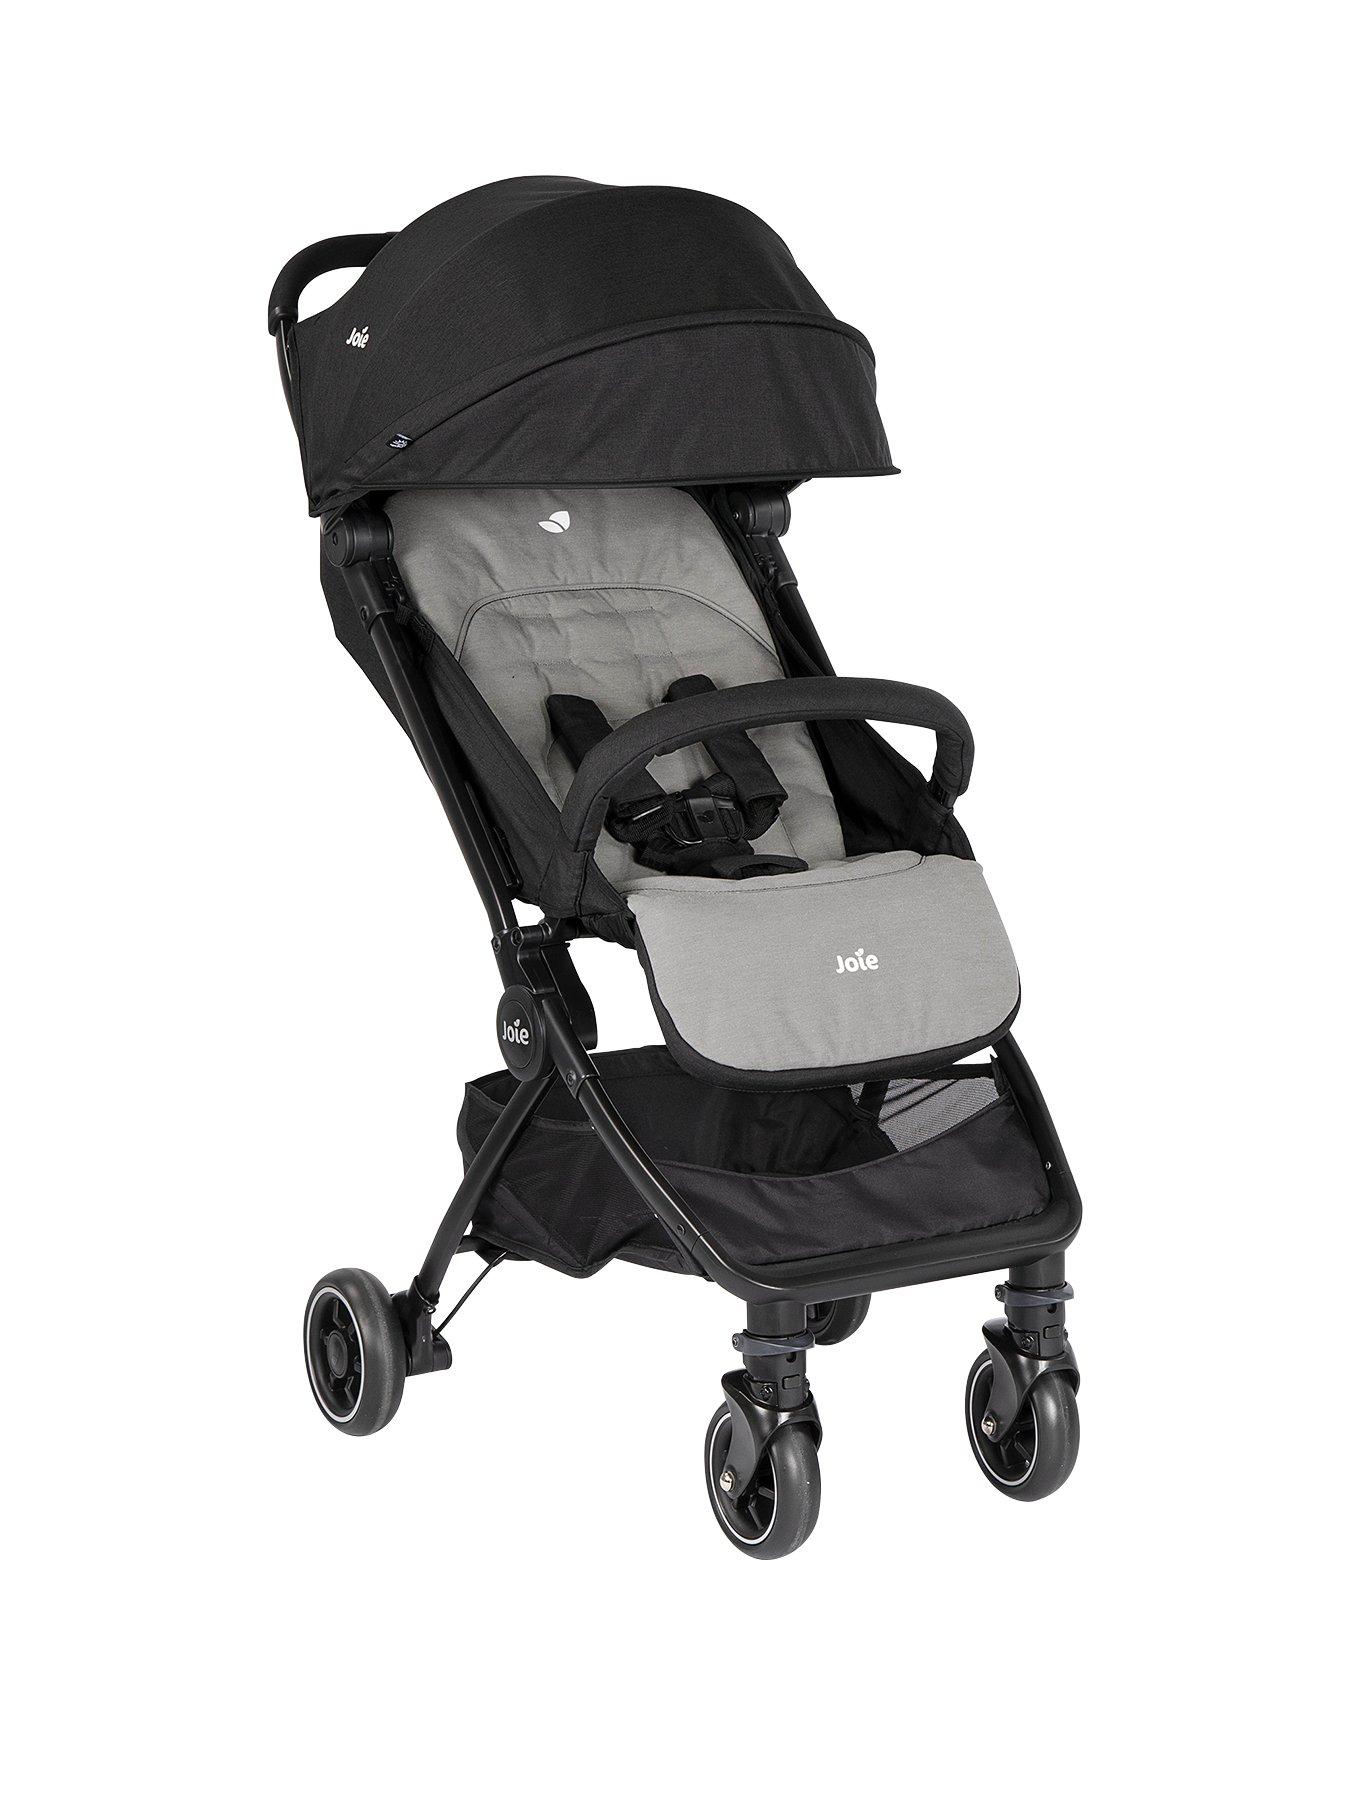 hauck rapid 4x pushchair mickey cool vibes